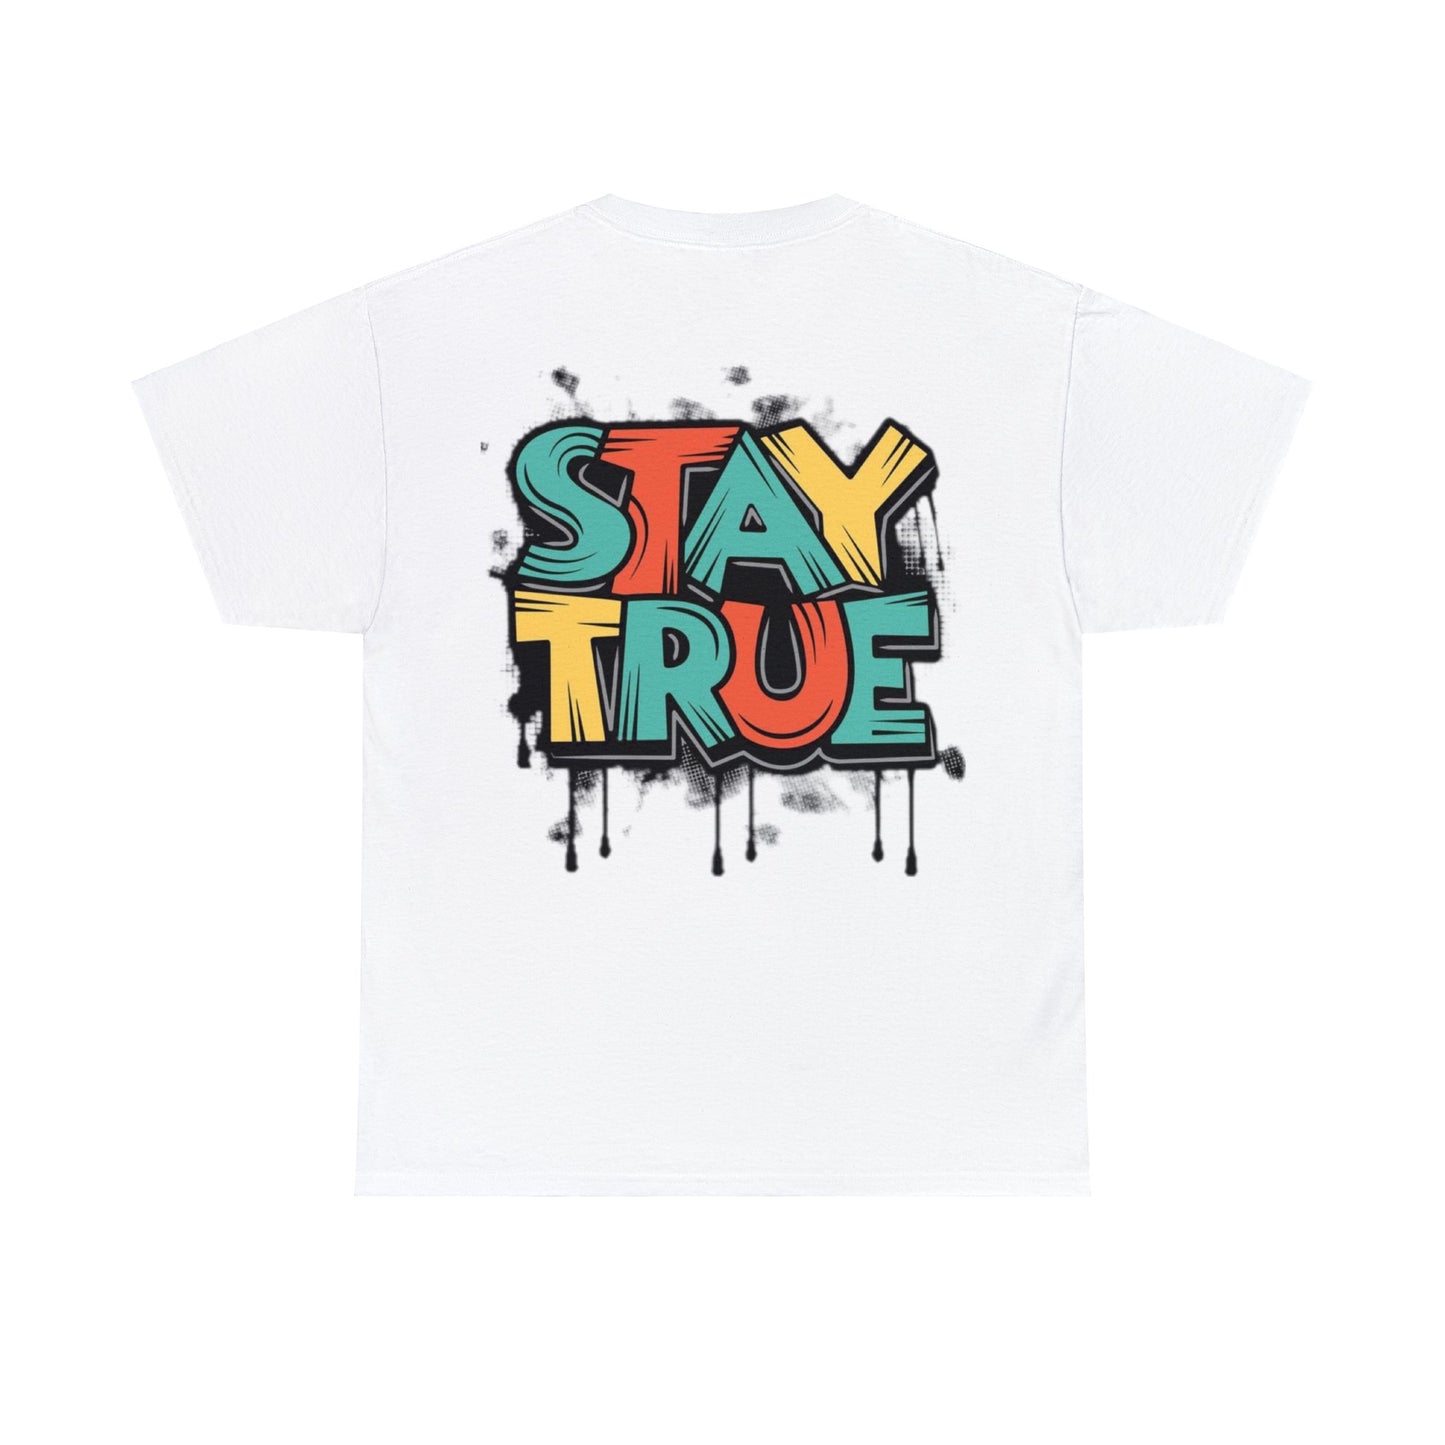 Real Talk BiG Facts "Stay True" Unisex Heavy Cotton Tee